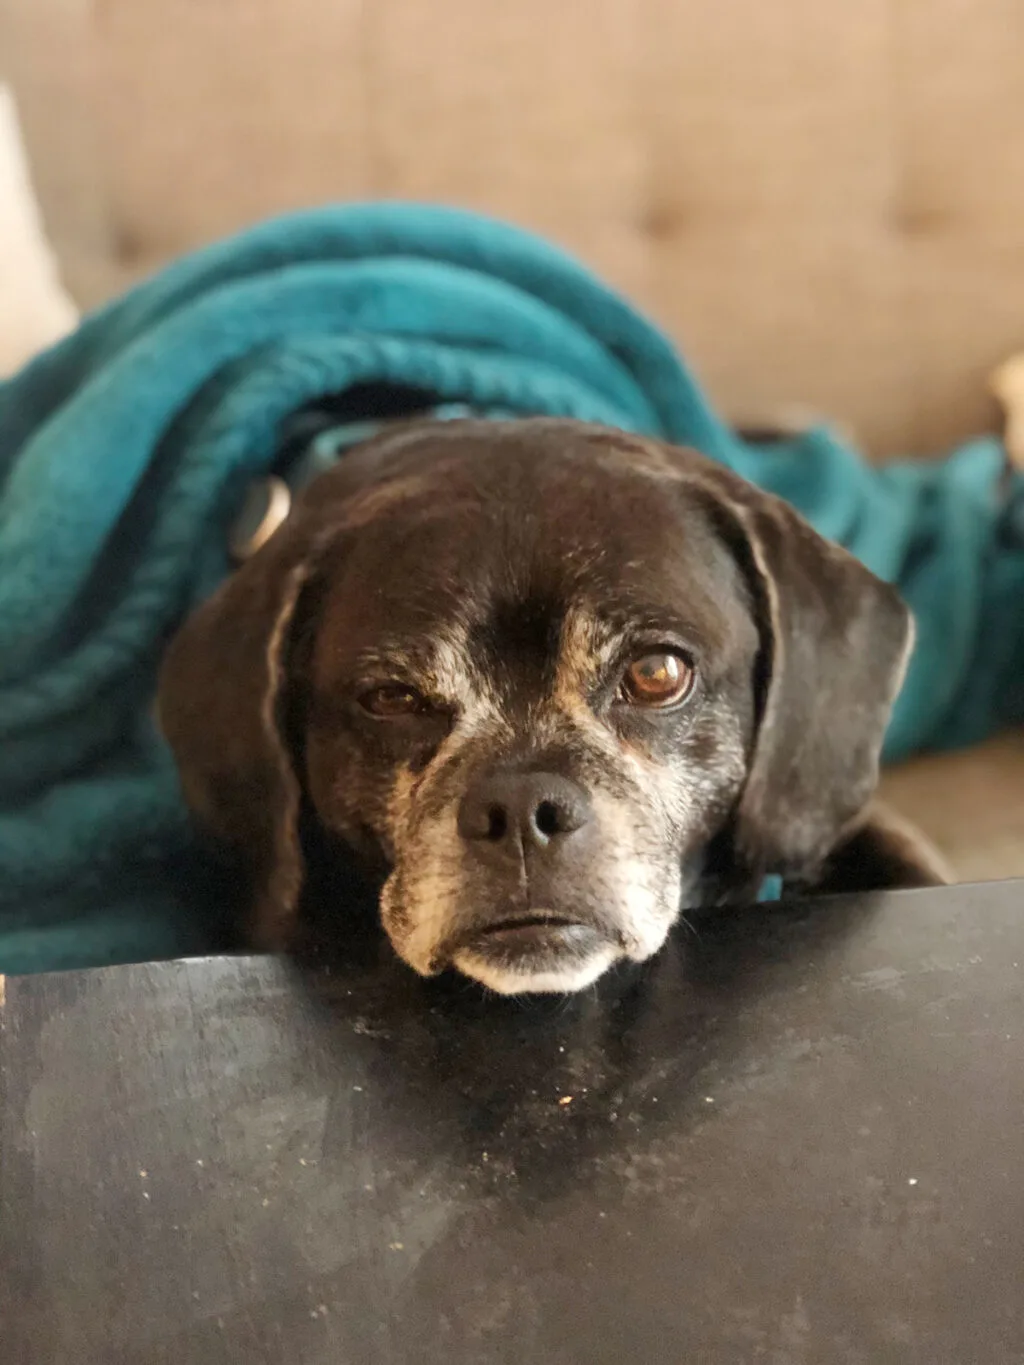 a black puggle os rolled in a turquoise fleece blanket and looks grumpily at the camera.